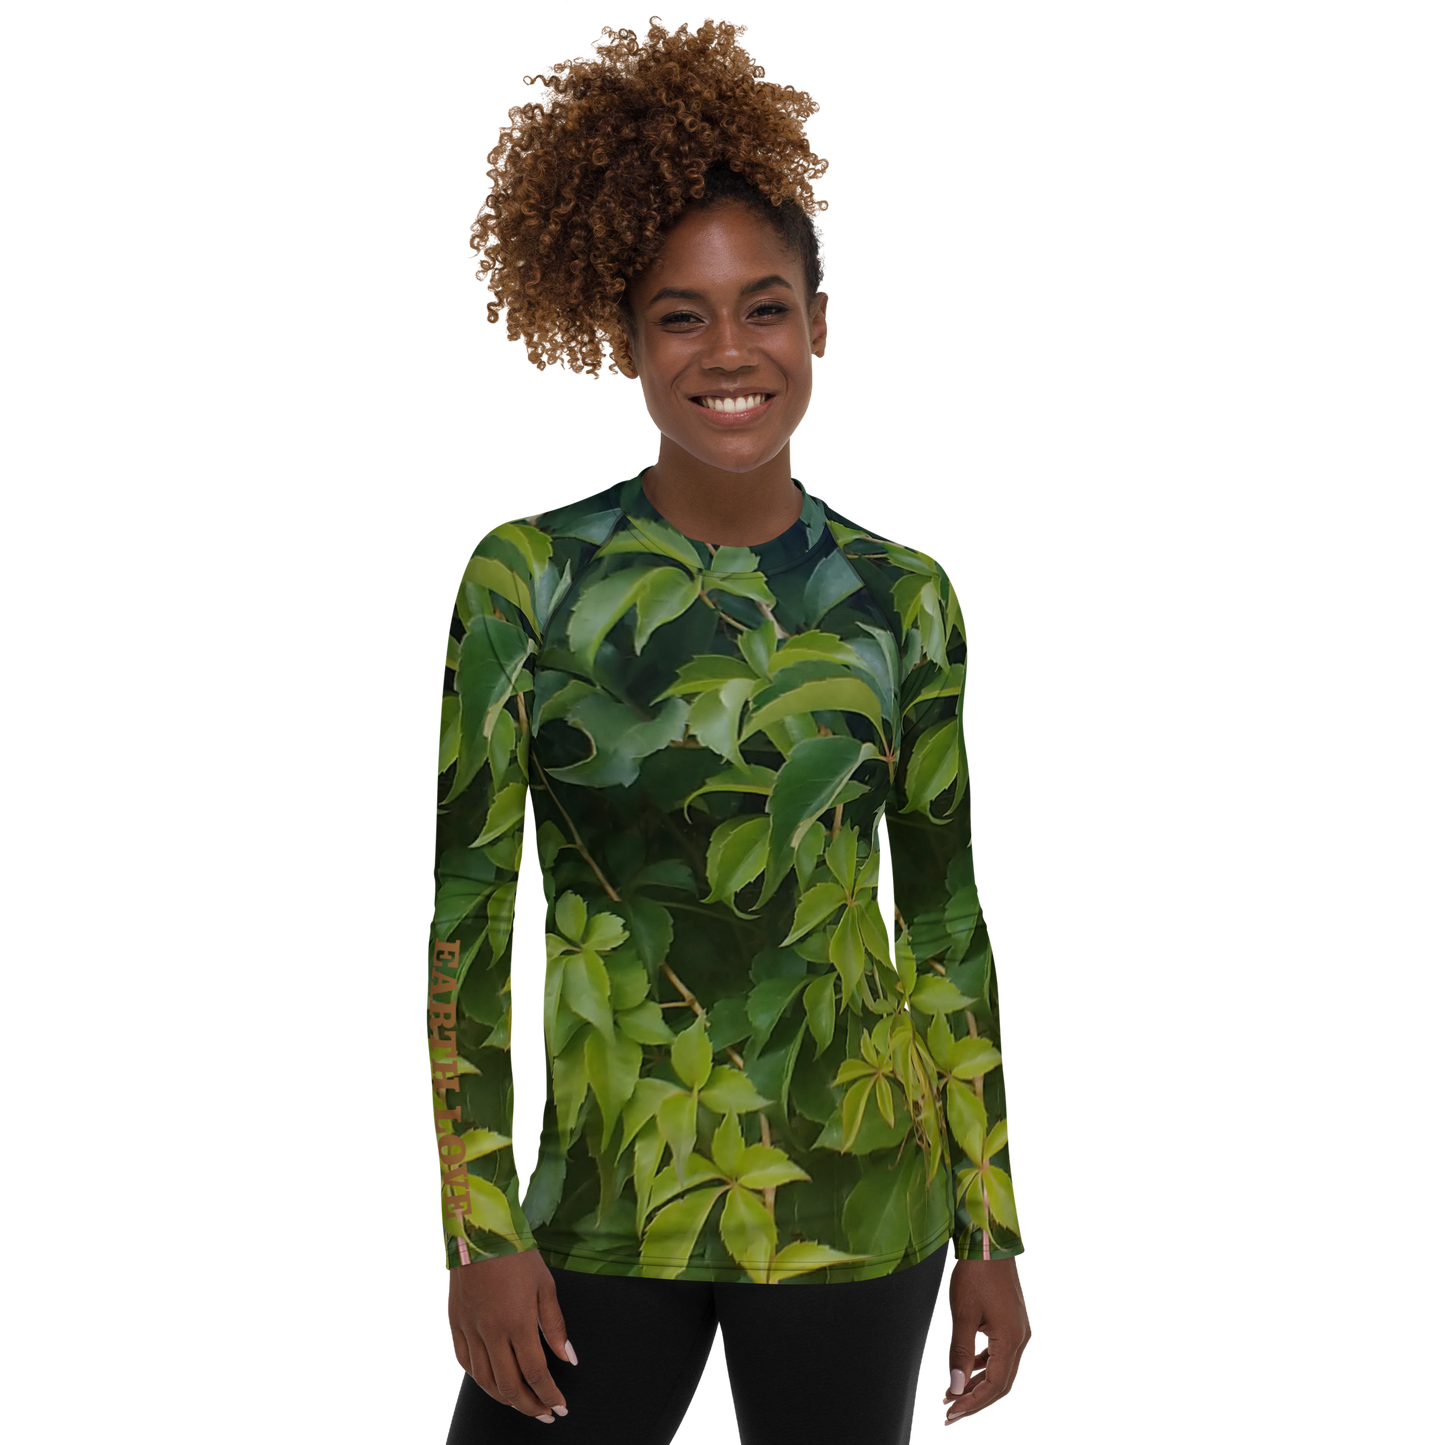 The EARTH LOVE Collection - "Valiant Virginia Creeper" Design Luxurious Women's Rash Guard, Sun Protective Clothing, Sports & Fitness Clothing